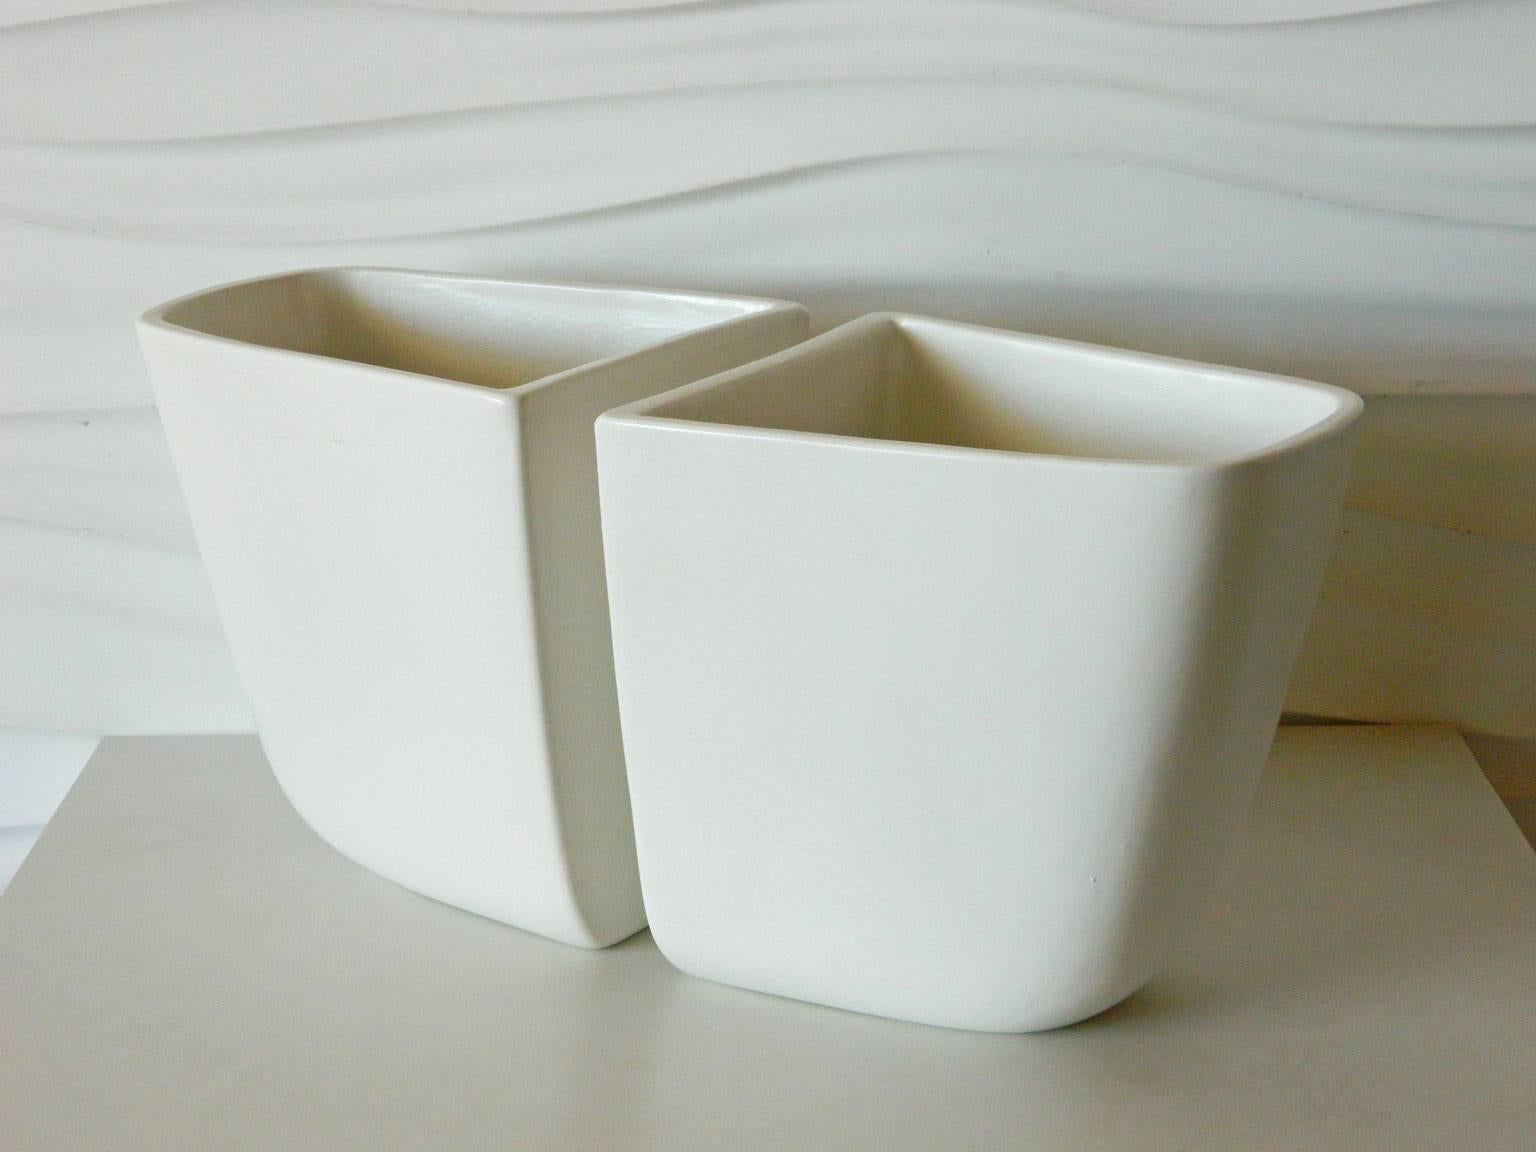 Iconic Mid-Century planters by ceramic artist Malcolm Leland for Los Angeles Architectural Pottery.